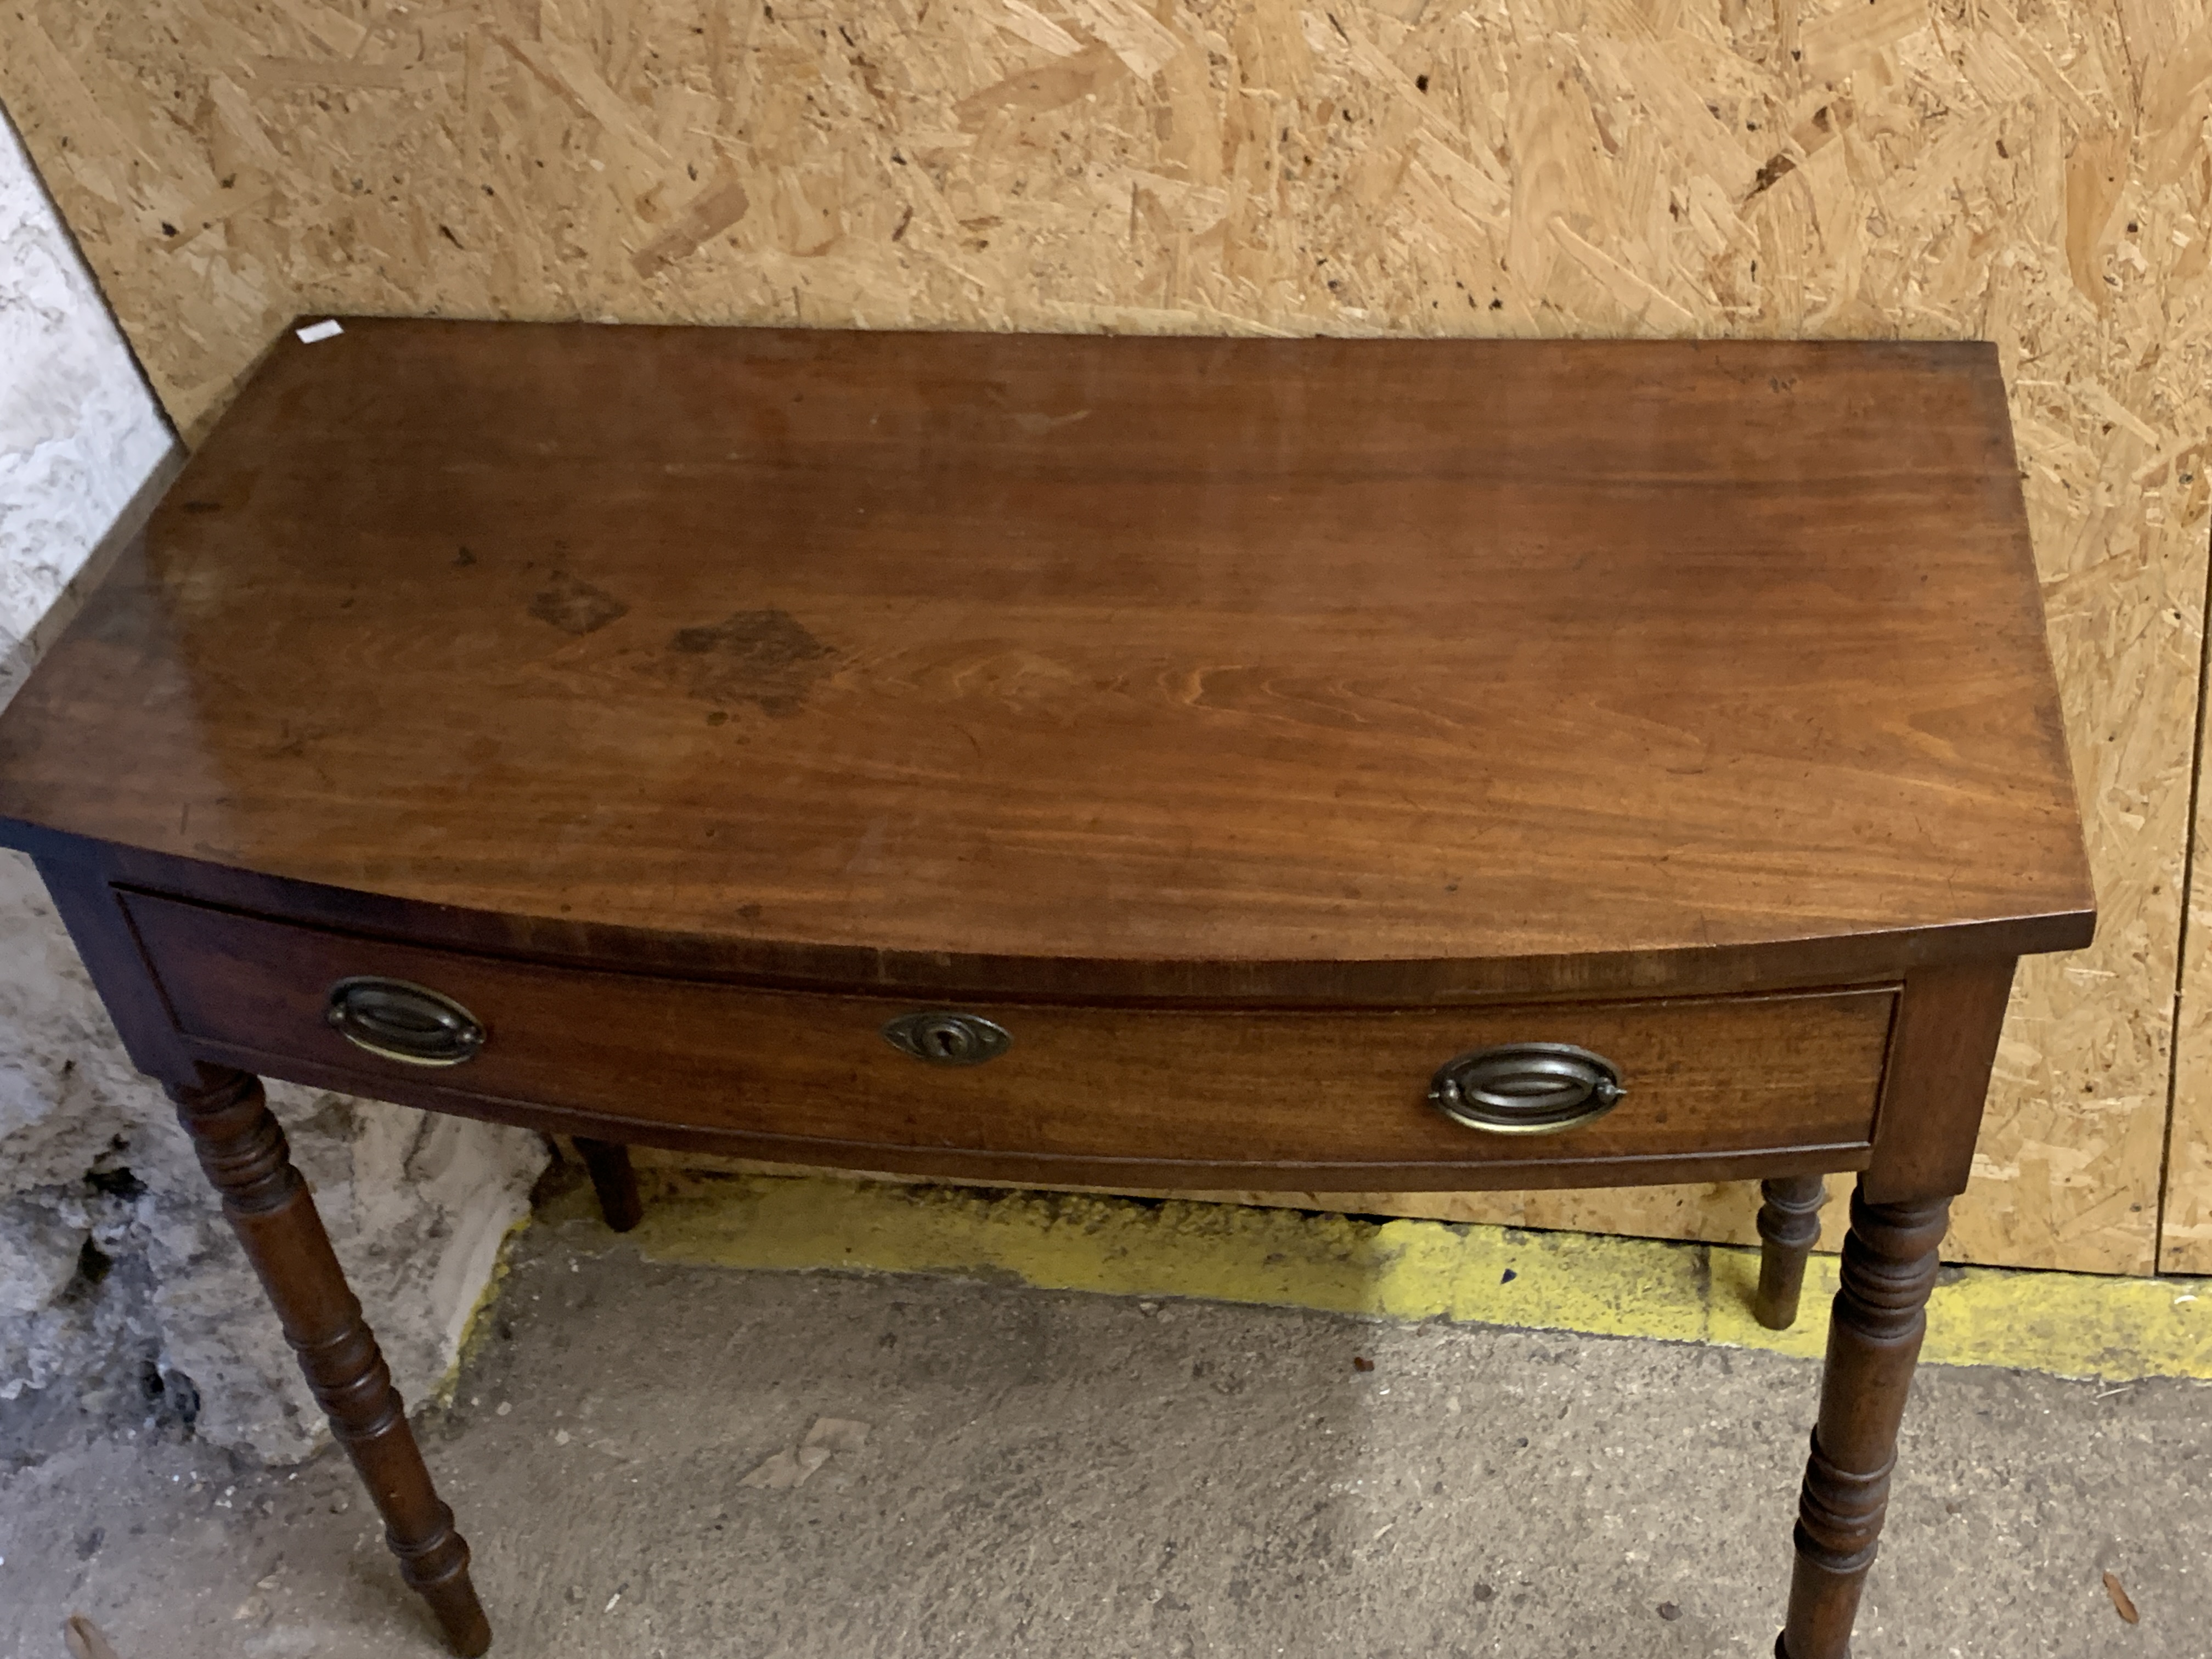 A Regency mahogany bowfront side table, with single drawer, on turned tapering legs, 99x51x79cm